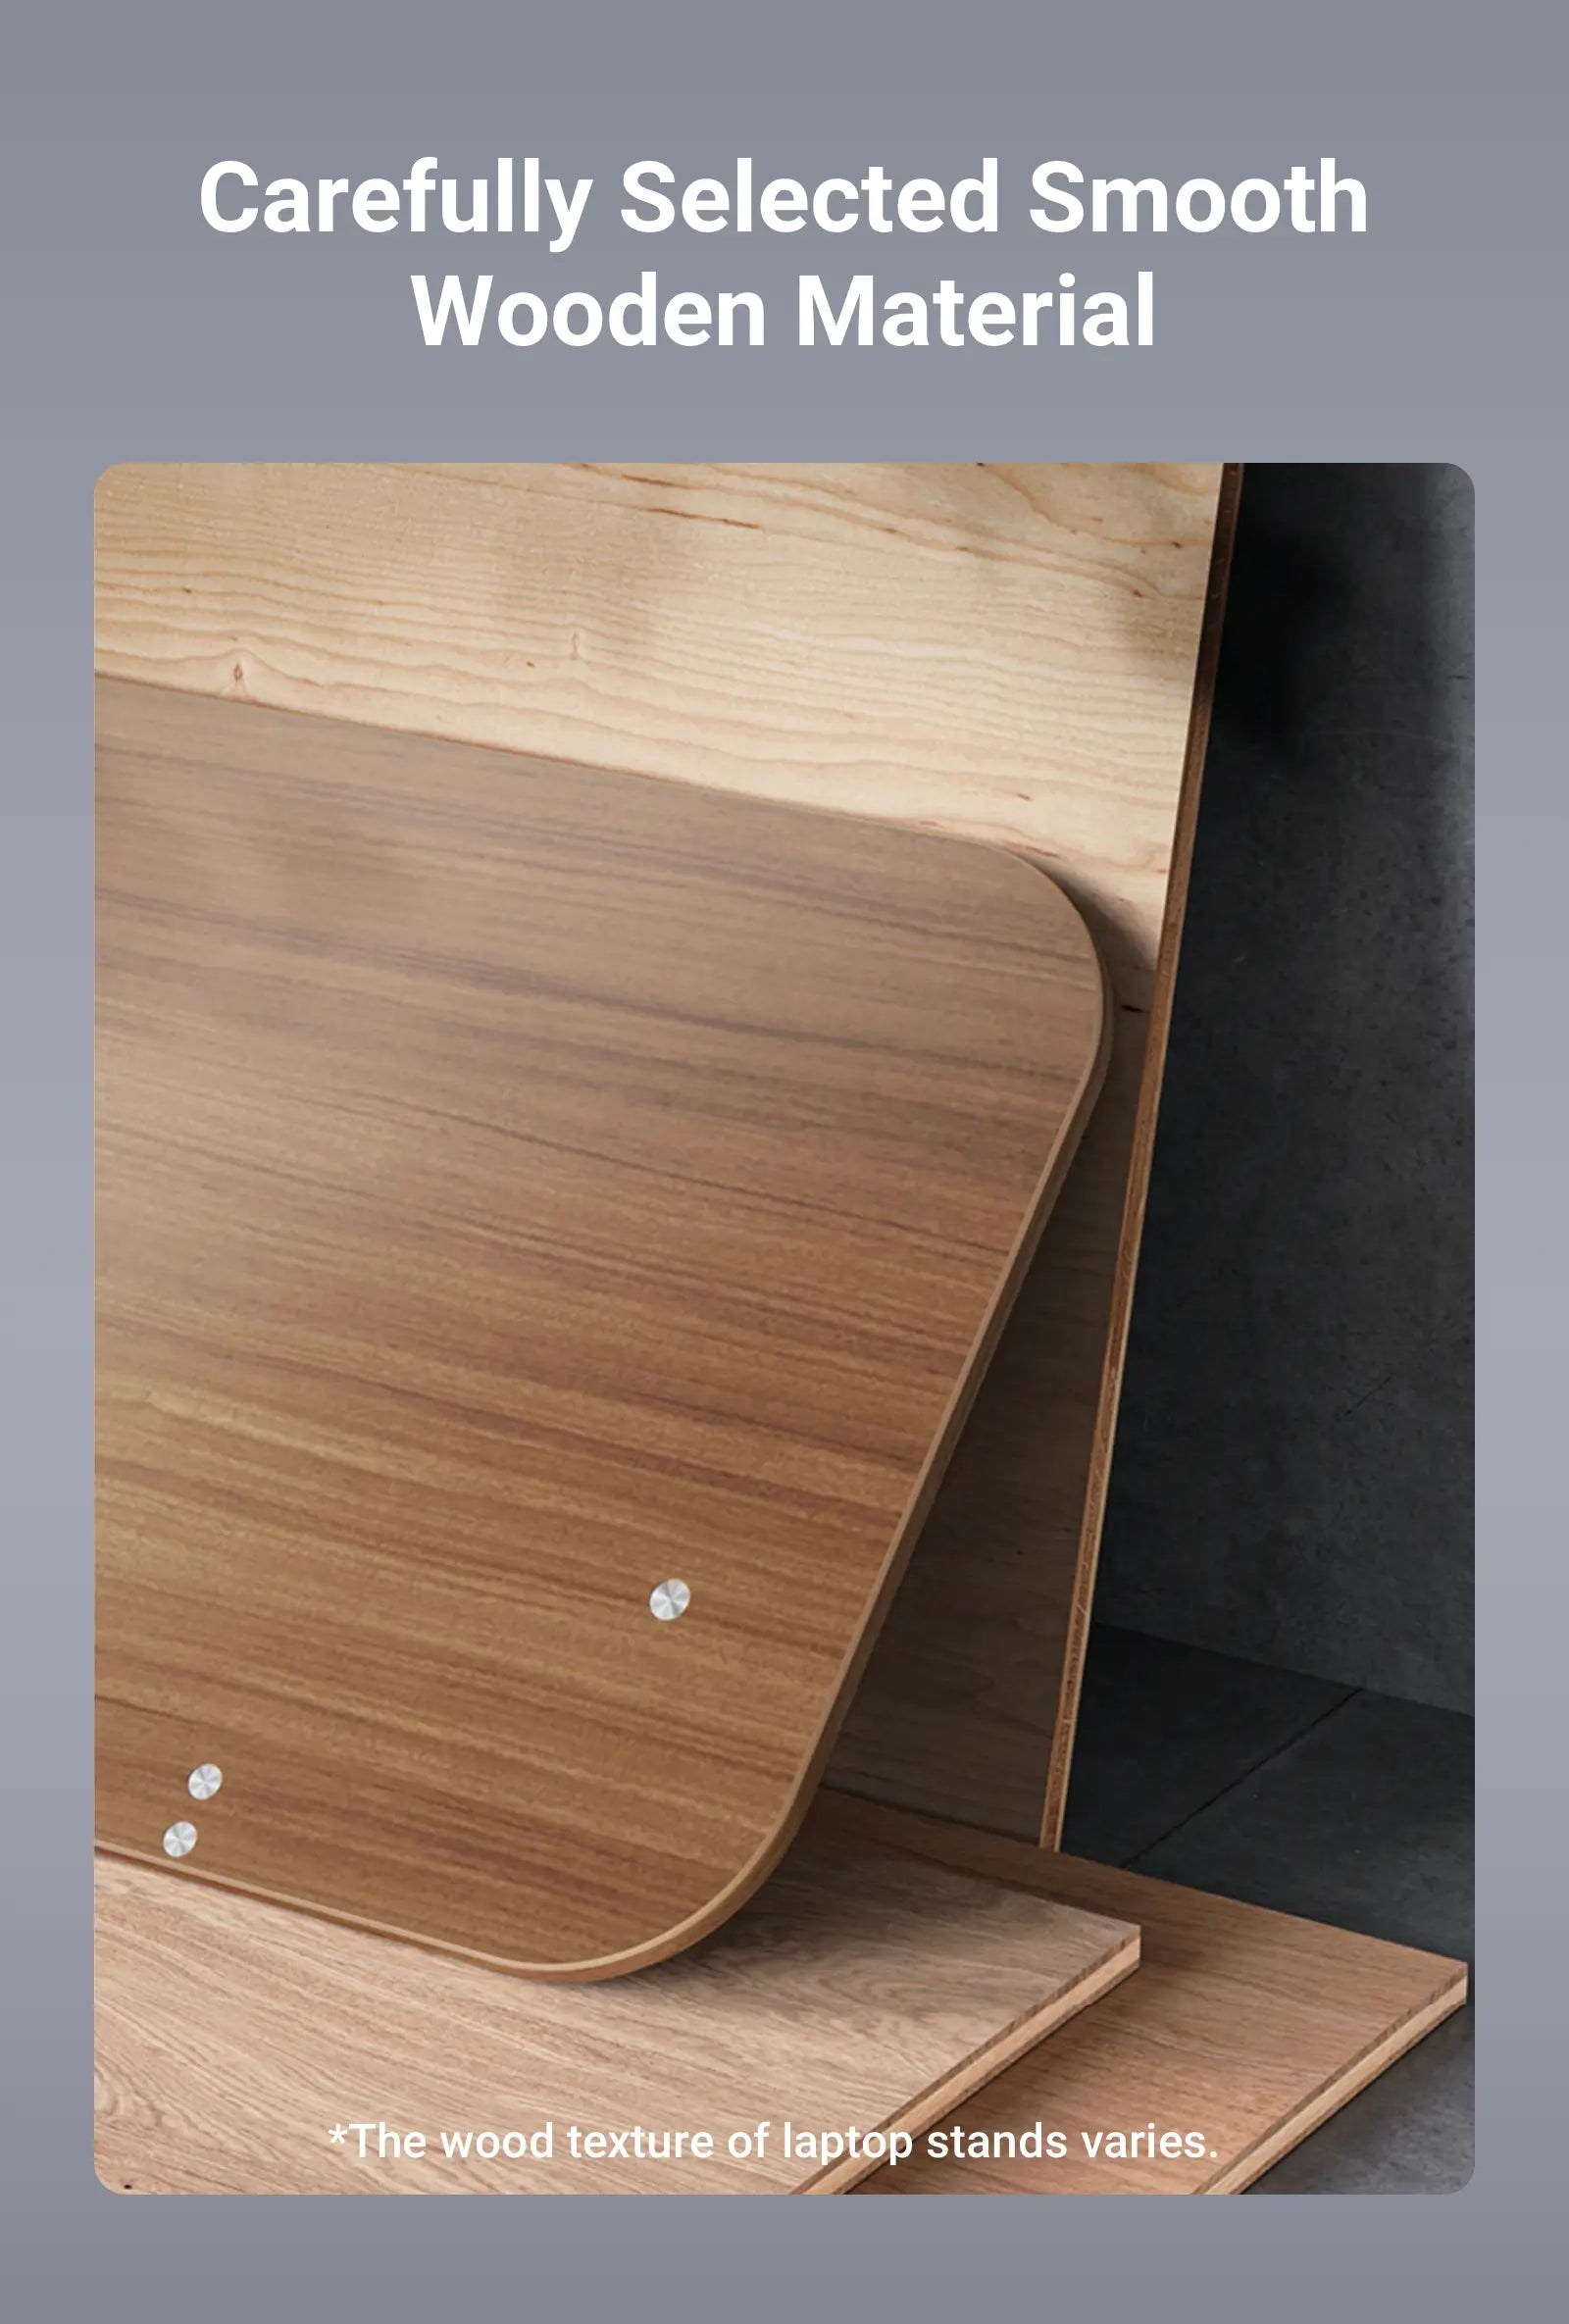 Carefully Selected Smooth Wooden Material